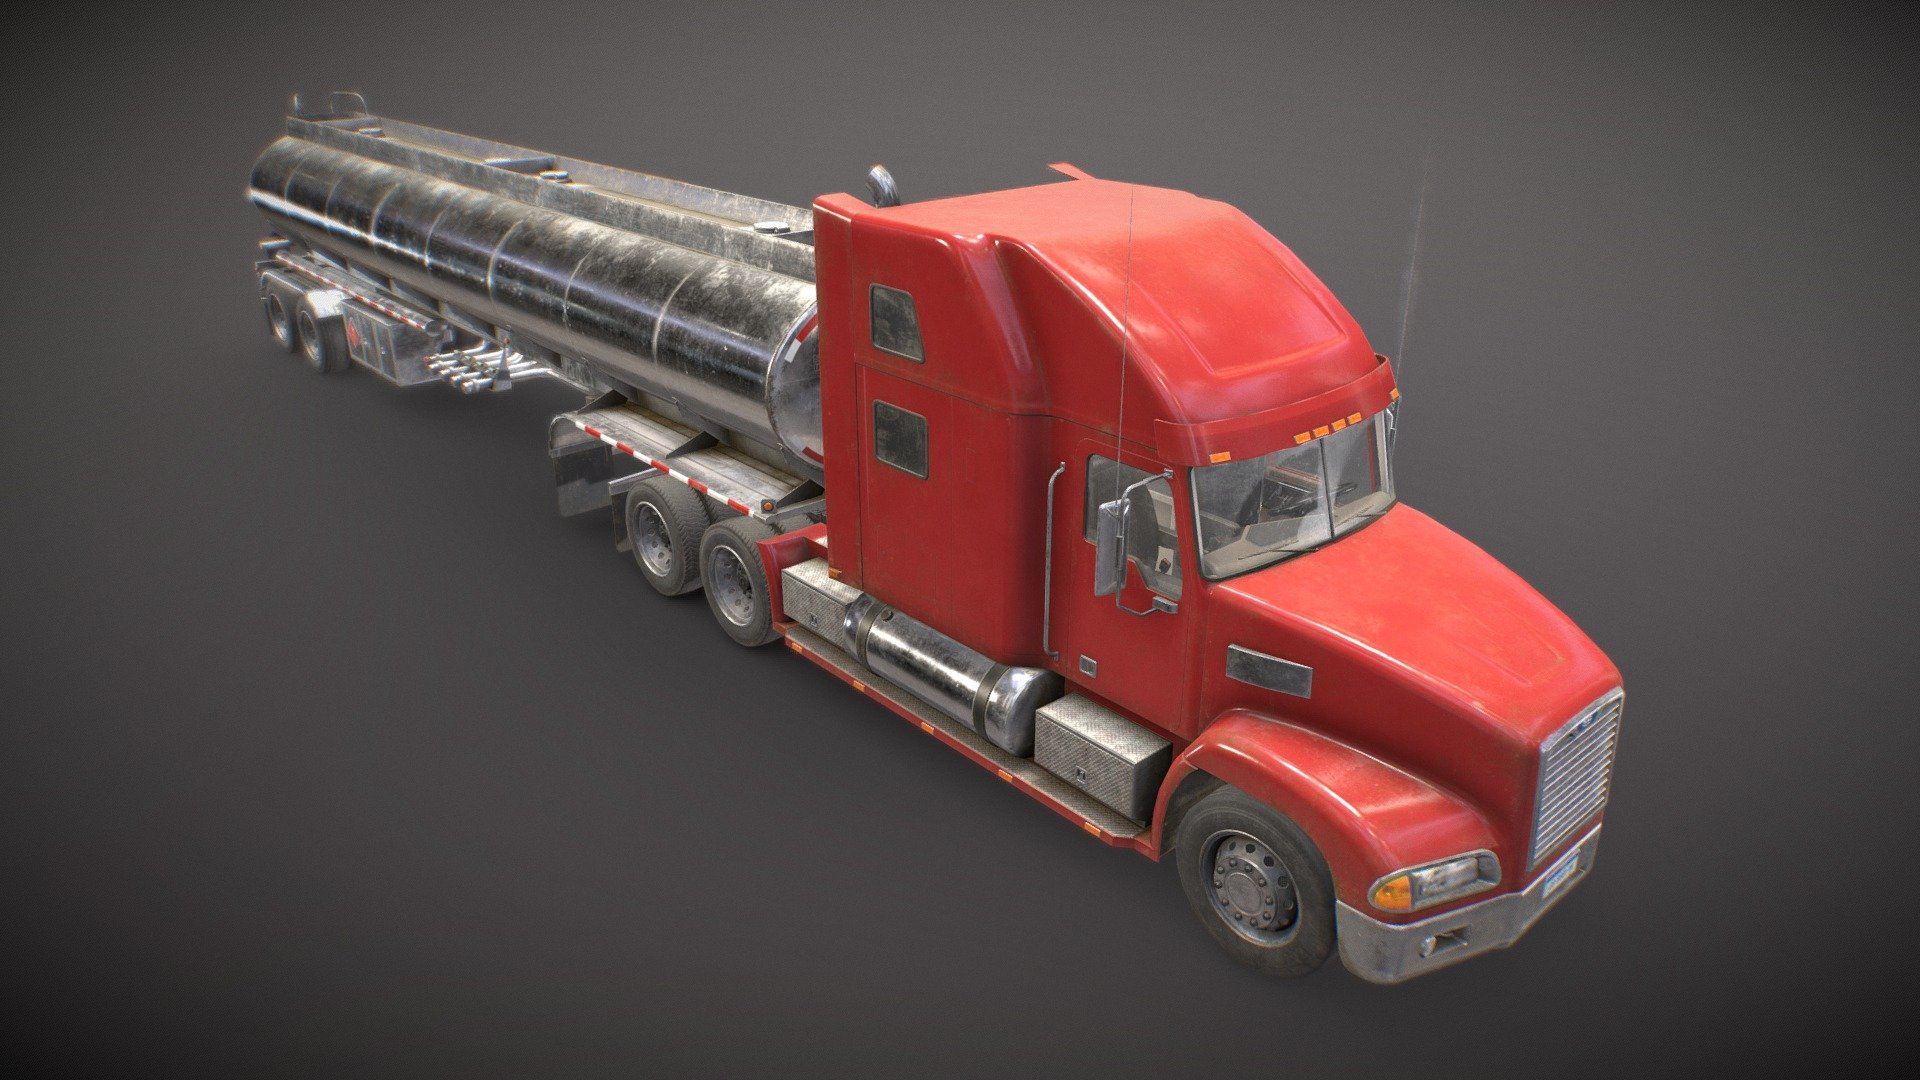 Game Ready Semi Truck with a Fuel Tank Trailer

Low Poly vehicle including 4 different colors for Tractor:




Real-world scale and centered

The unit of measurement used is centimeters

Cabin interior fully modeled and textured

All doors, wheels, feet and steering wheel can be easily rigged/animated

PBR textures made in Substance Painter

All branding and labels are custom made

Second uv channel included

Packed ORM textures included for Unreal

4 BaseColor textures included for tractor body (red, blue, green and orange)

Polys:




Truck: 18562 (36071 tris)

Trailer: 11834 (23081 tris)

TOTAL:  30396 (59152 tris)

Maps sizes: 




Body, Chassis, Interior, Trailer Body, Trailer Details: 4096x4096

Wheels: 2048x2048

Windows: 1024x1024

Provided Maps:




Albedo 

Normal

Roughness

Metalness

AO

Opacity included in Albedo

Emissive

Formats Incuded: MAX / BLEND / OBJ / FBX 

This model can be used for any game, film, personal project, etc. You may not resell or redistribute any content - Semi Truck Tanker - Low Poly - Buy Royalty Free 3D model by MSWoodvine 3d model